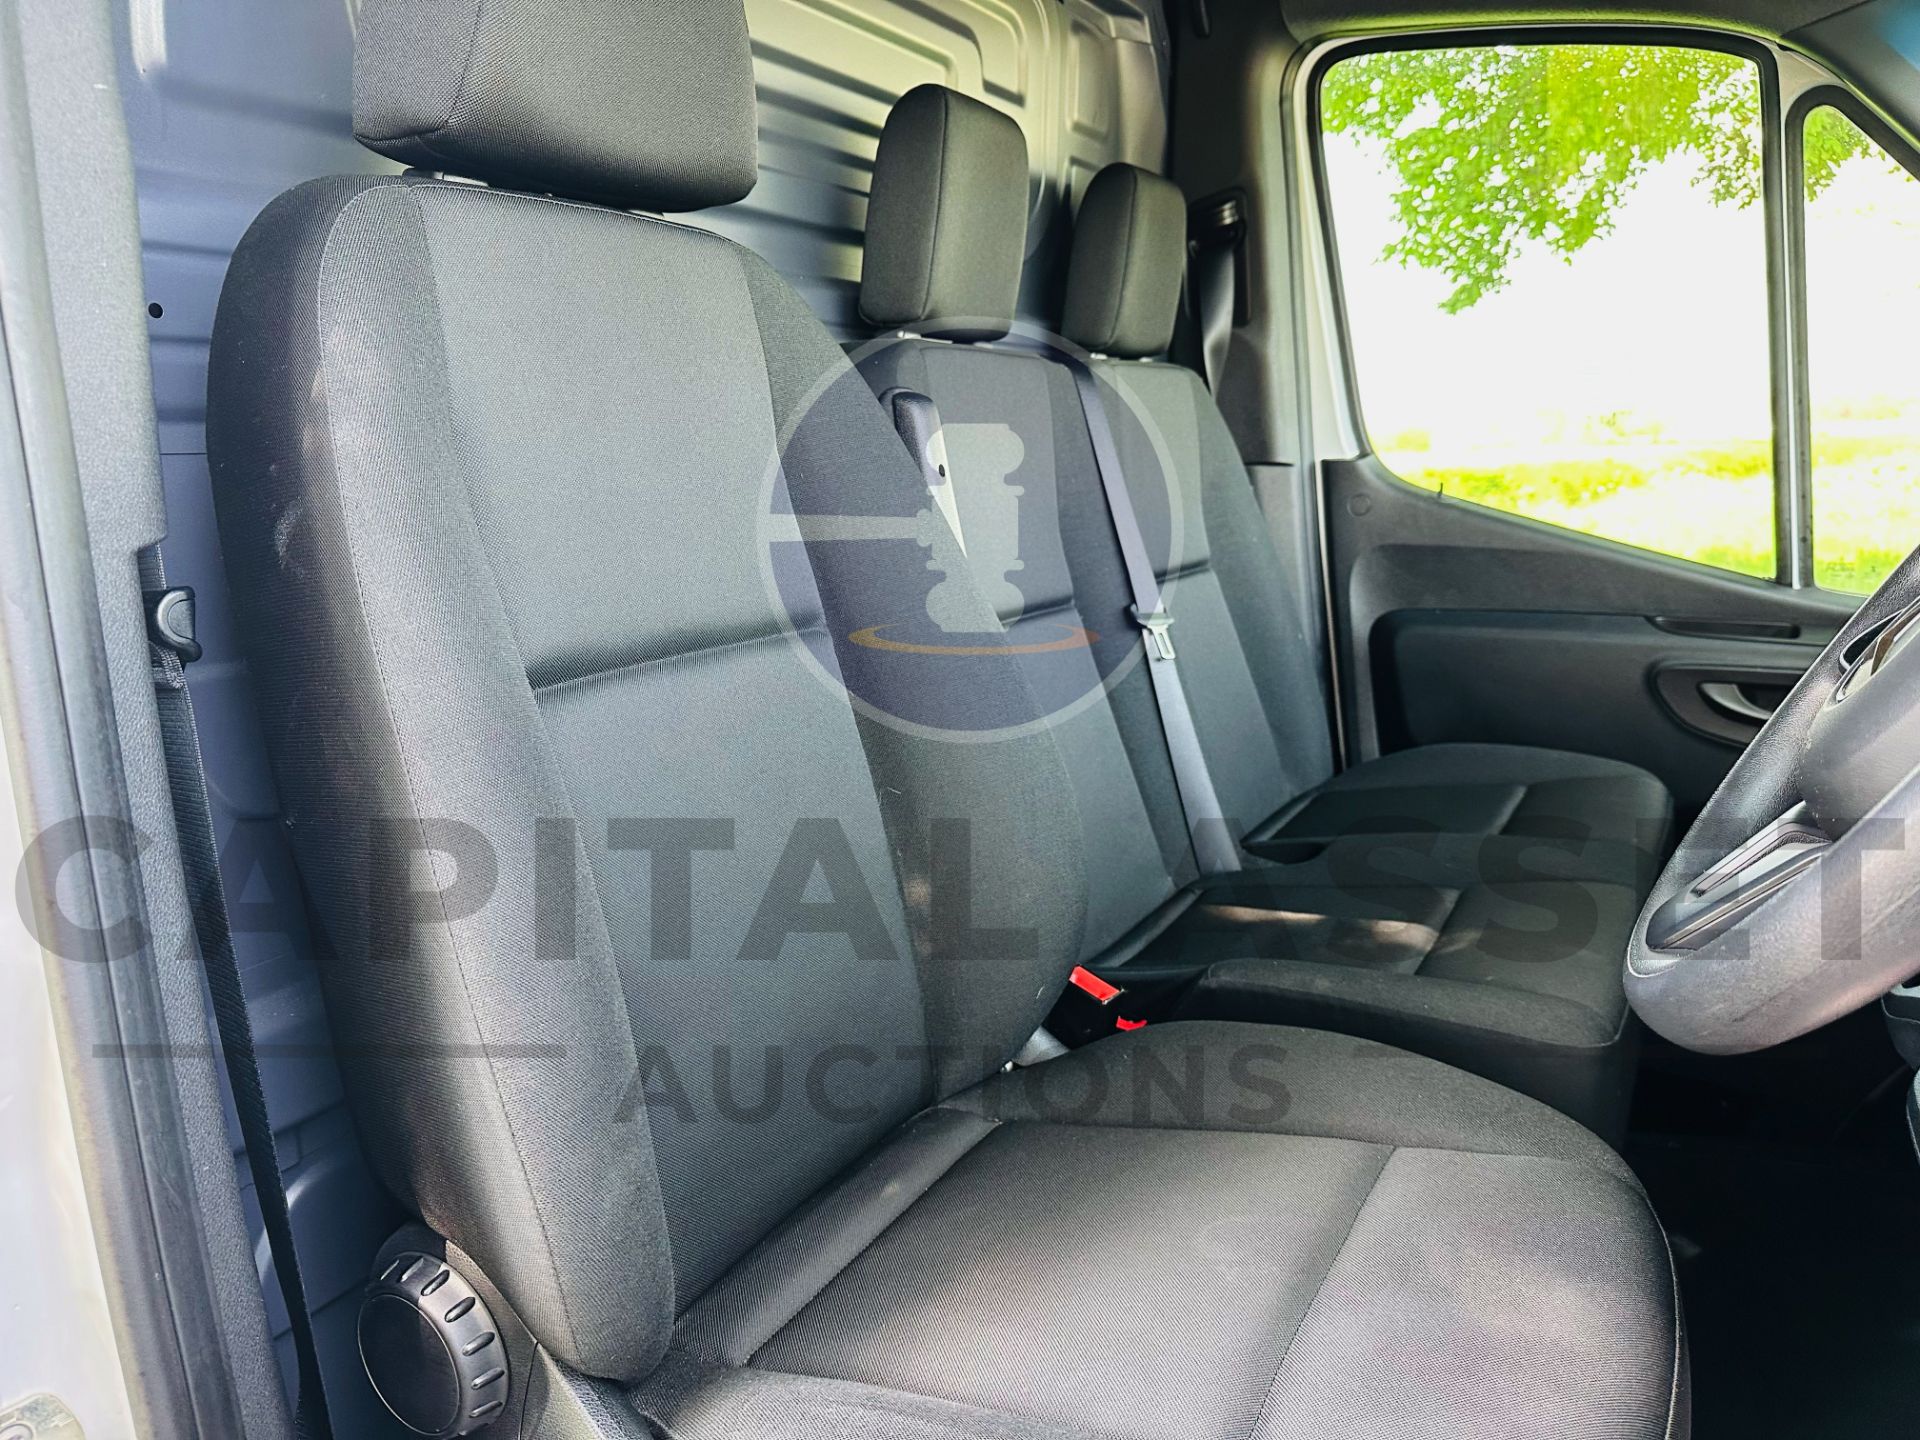 MERCEDES-BENZ SPRINTER *MEDIUM WHEEL BASE* AUTOMATIC - 2021 MODEL - AIR CONDITIONING - ONLY 5K MILES - Image 17 of 27